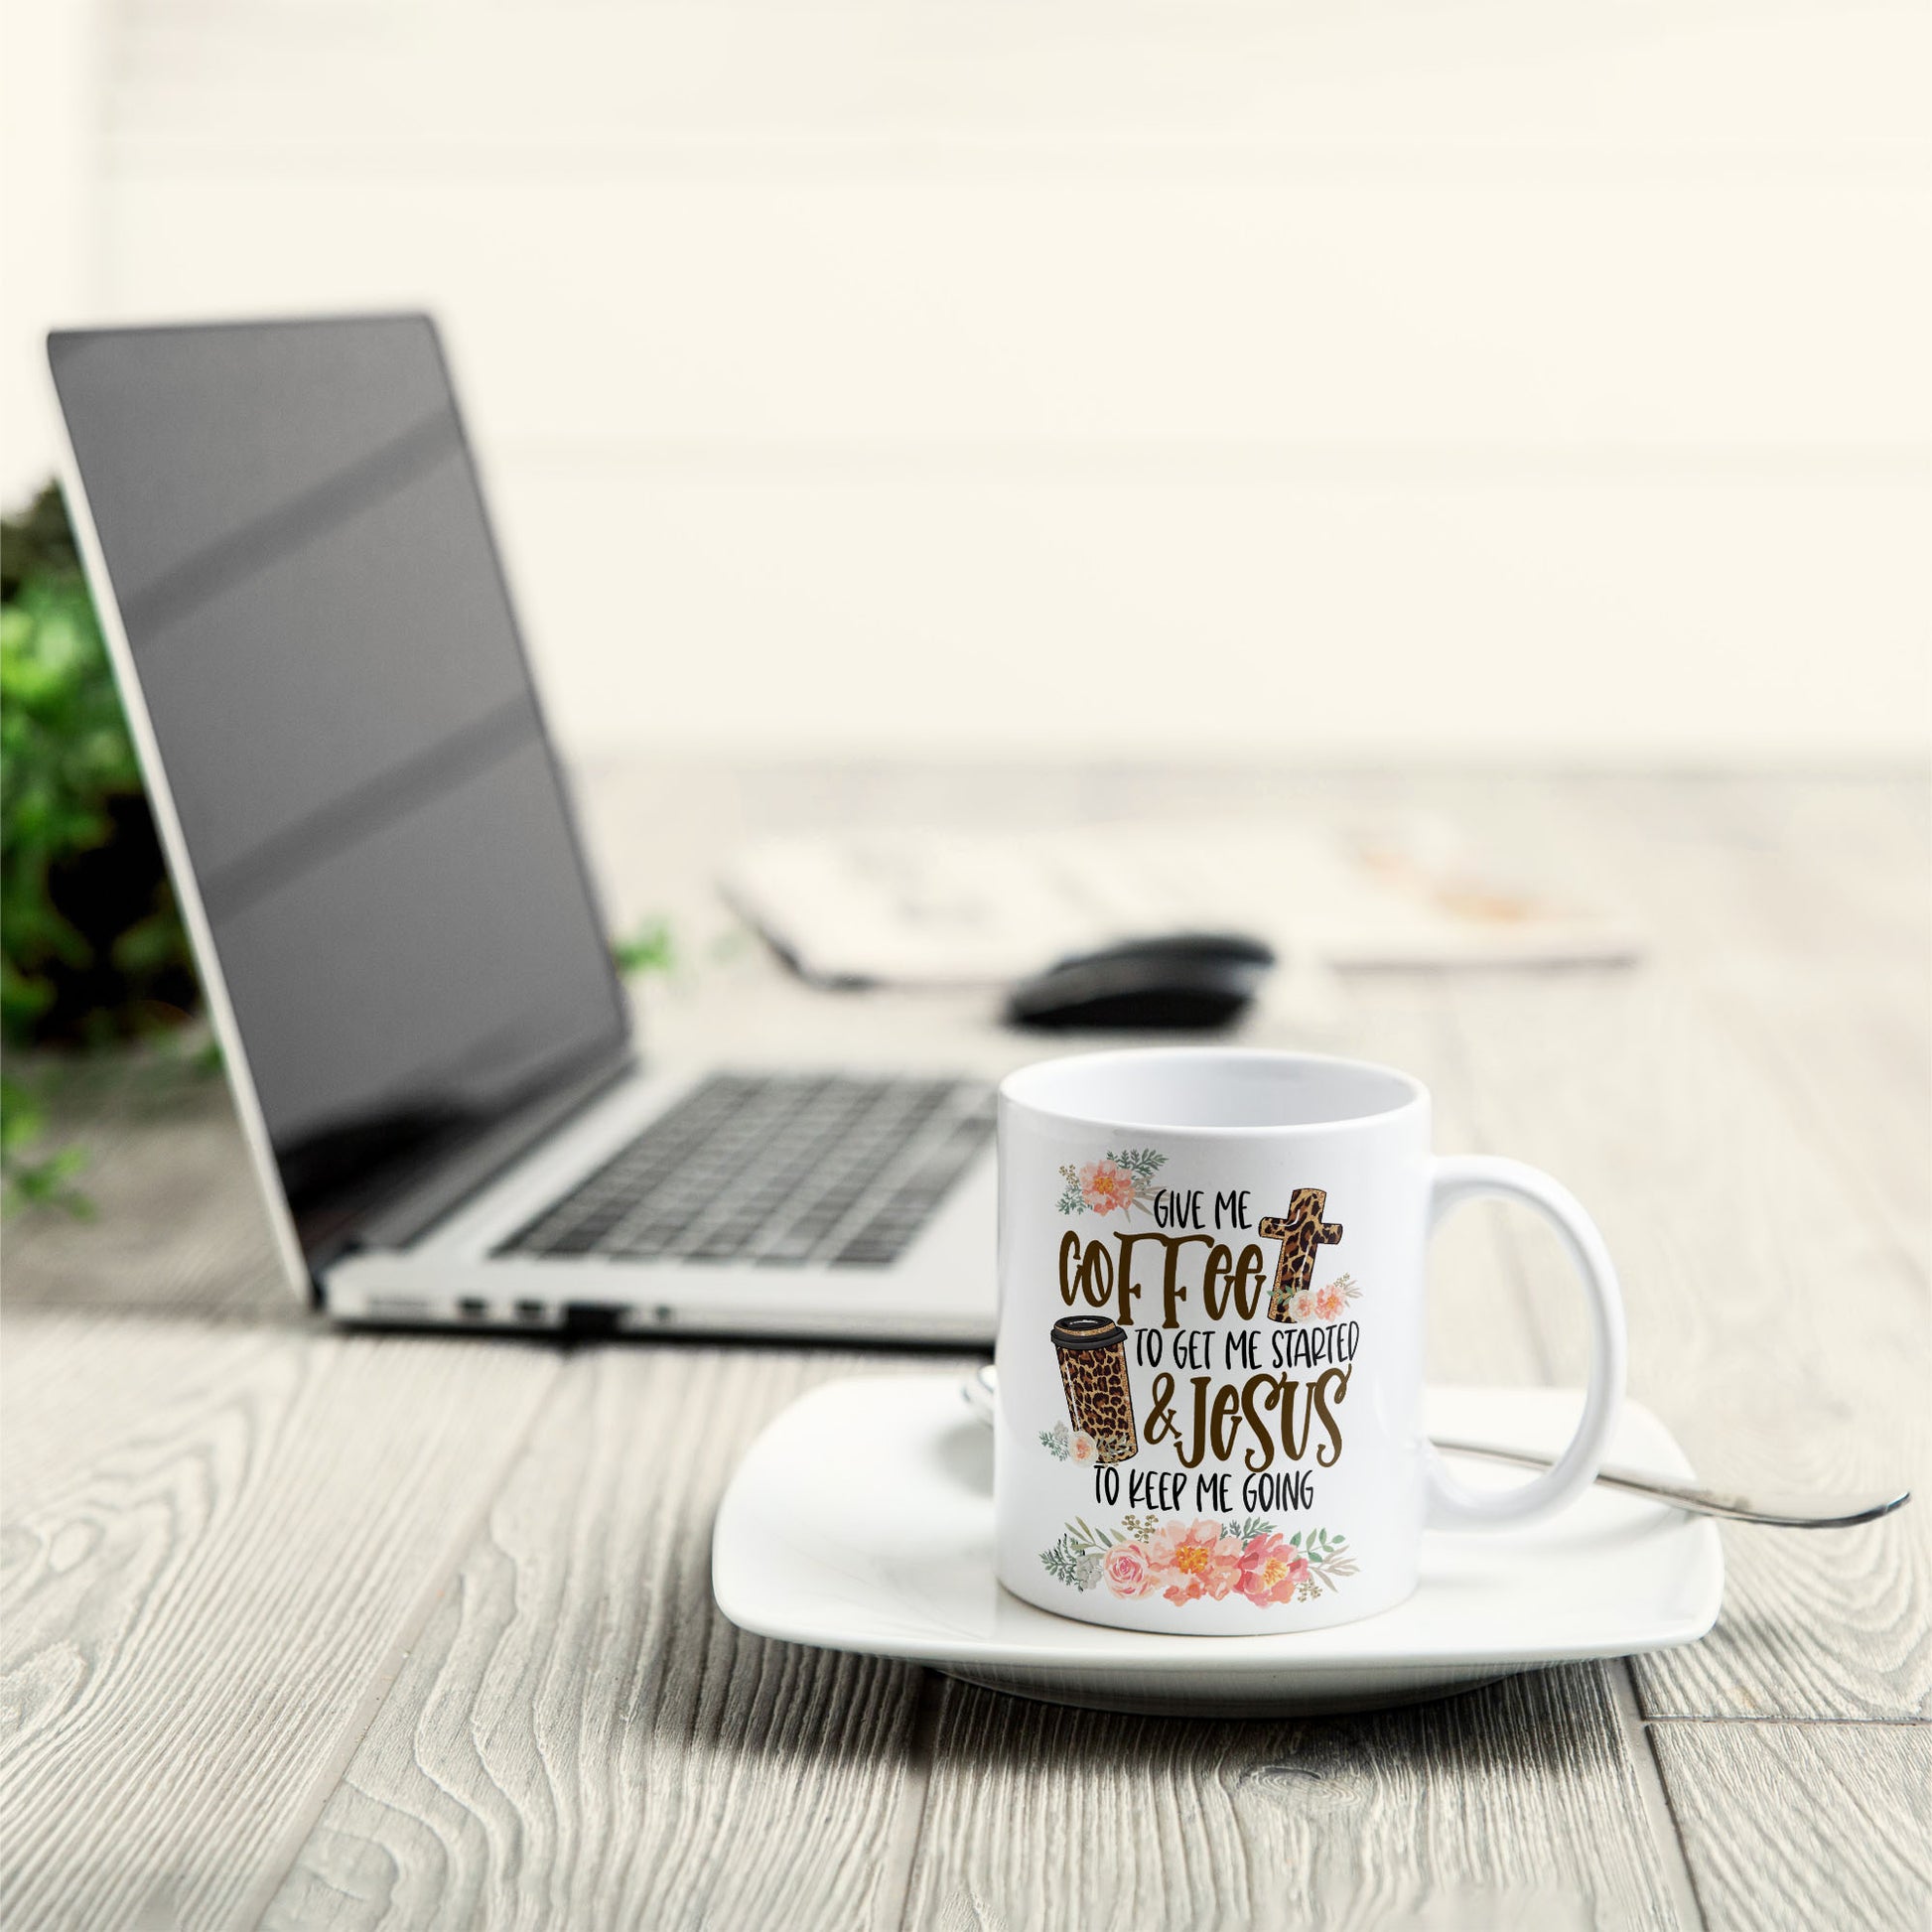 Give Me Coffee To Get Me Started - Personalized Mug - Christmas Gift For Coffee Lovers, Christians